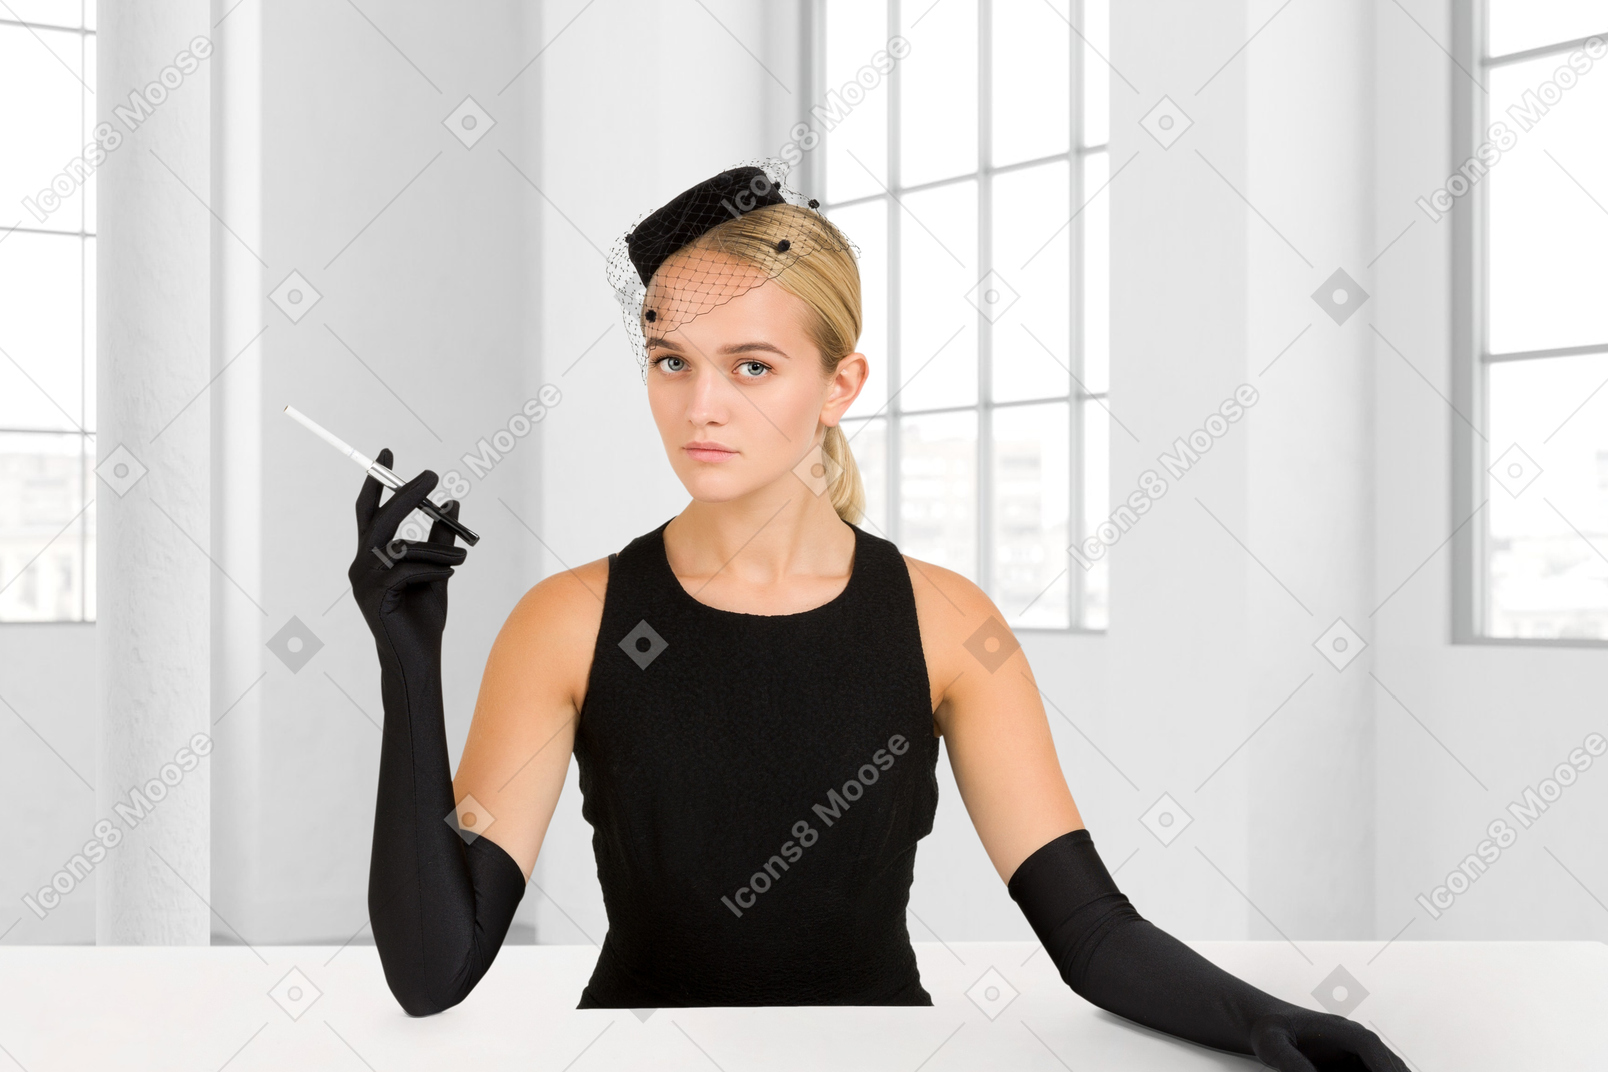 A woman sitting at a table with a cigarette in her hand